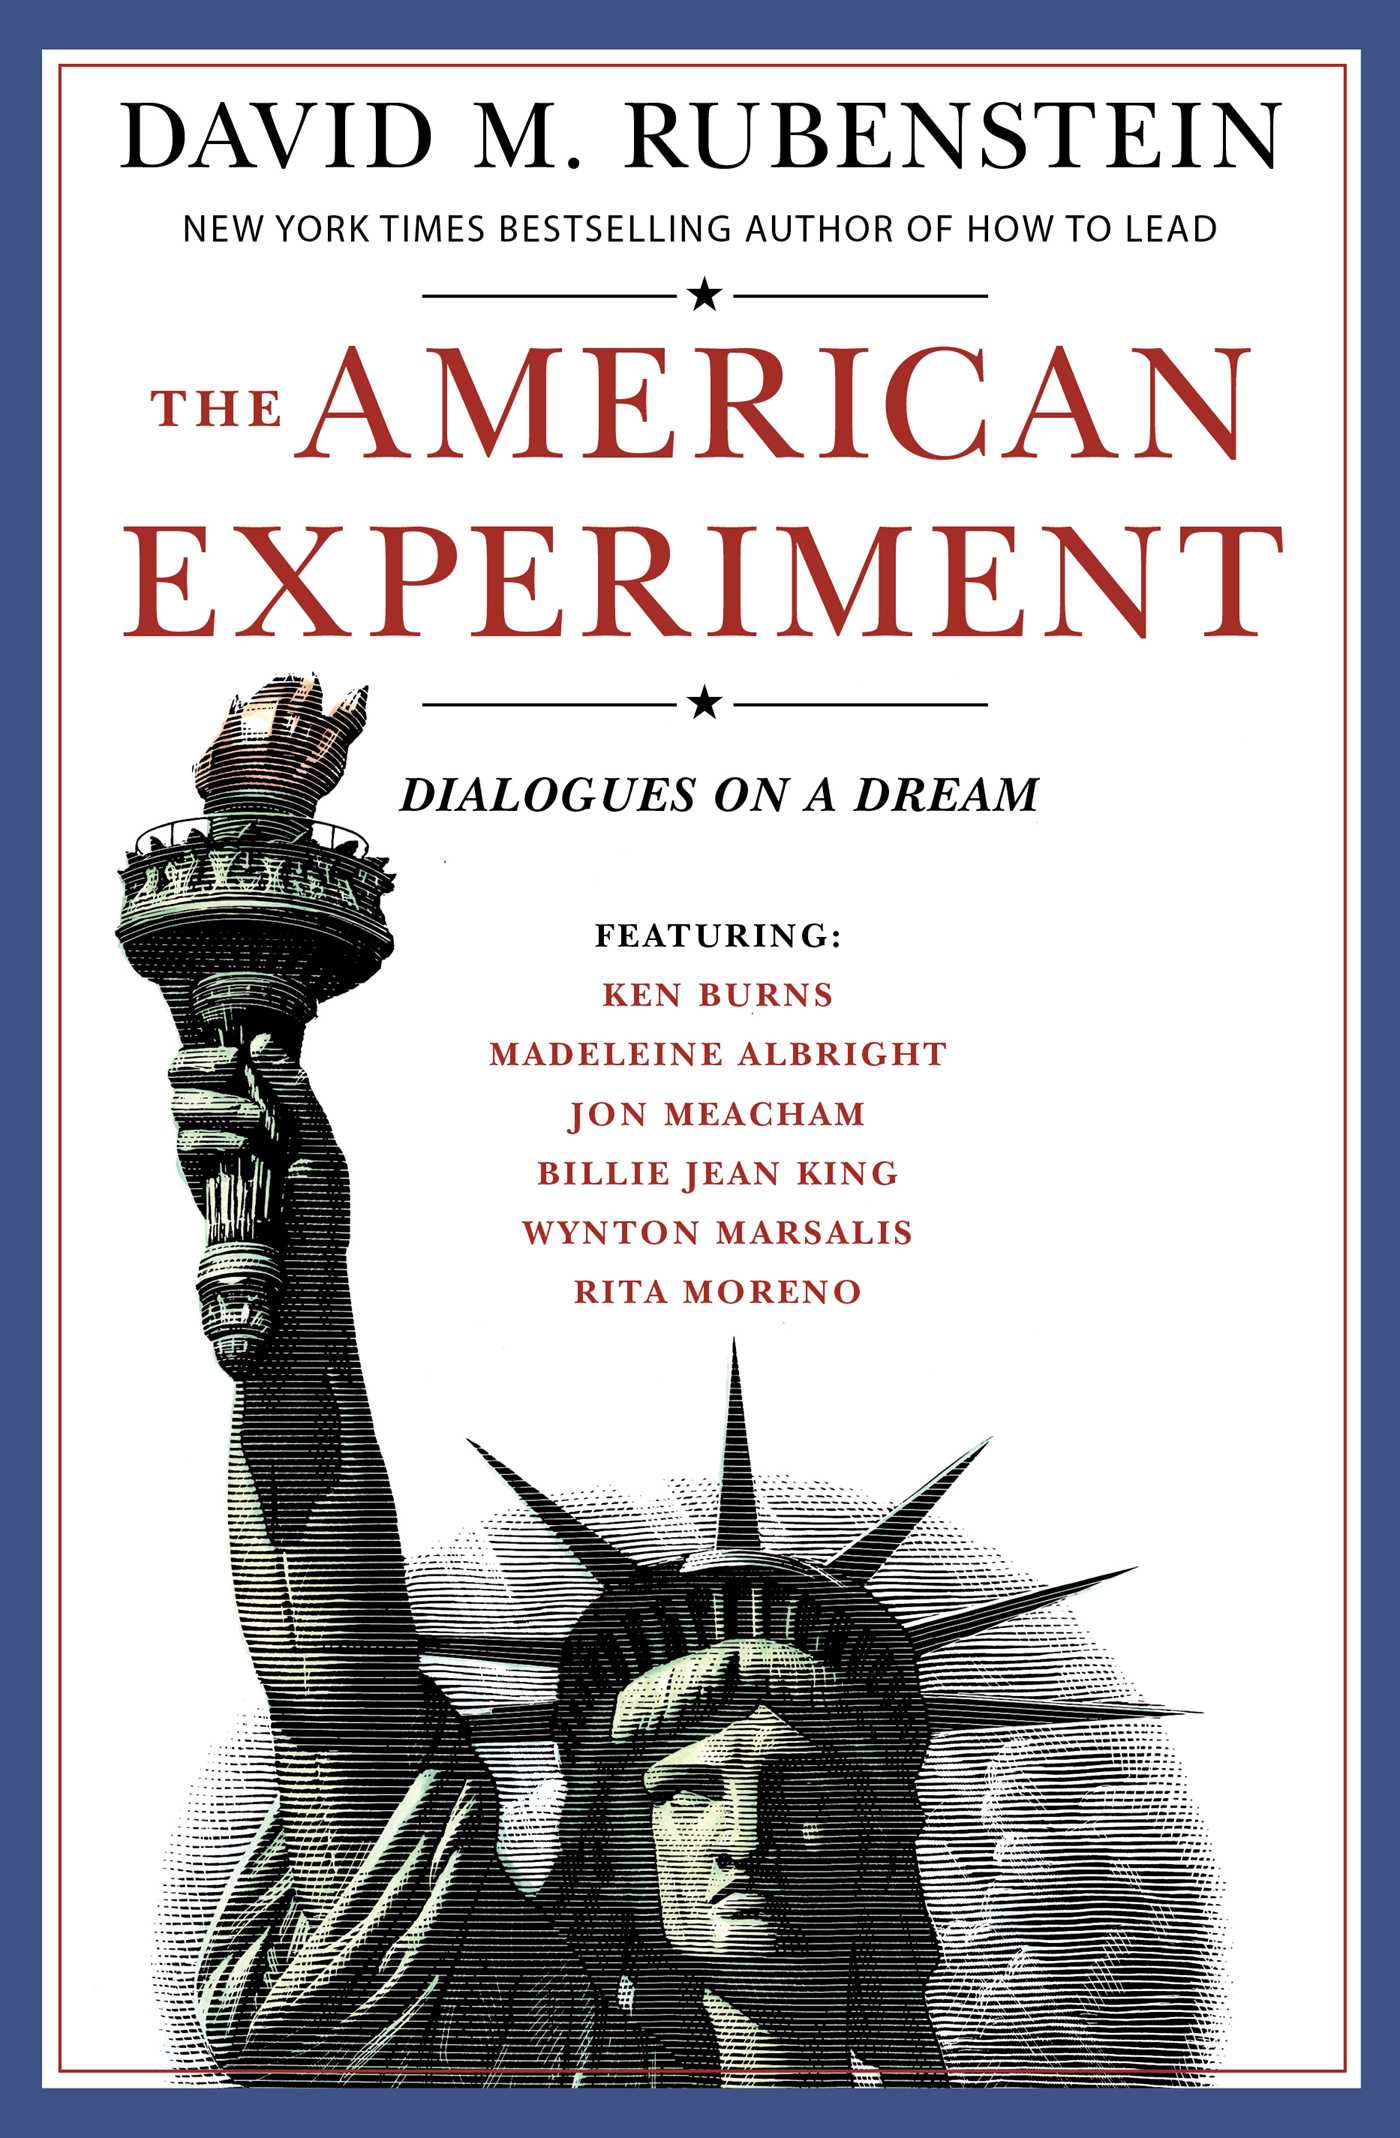 The American Experience book cover